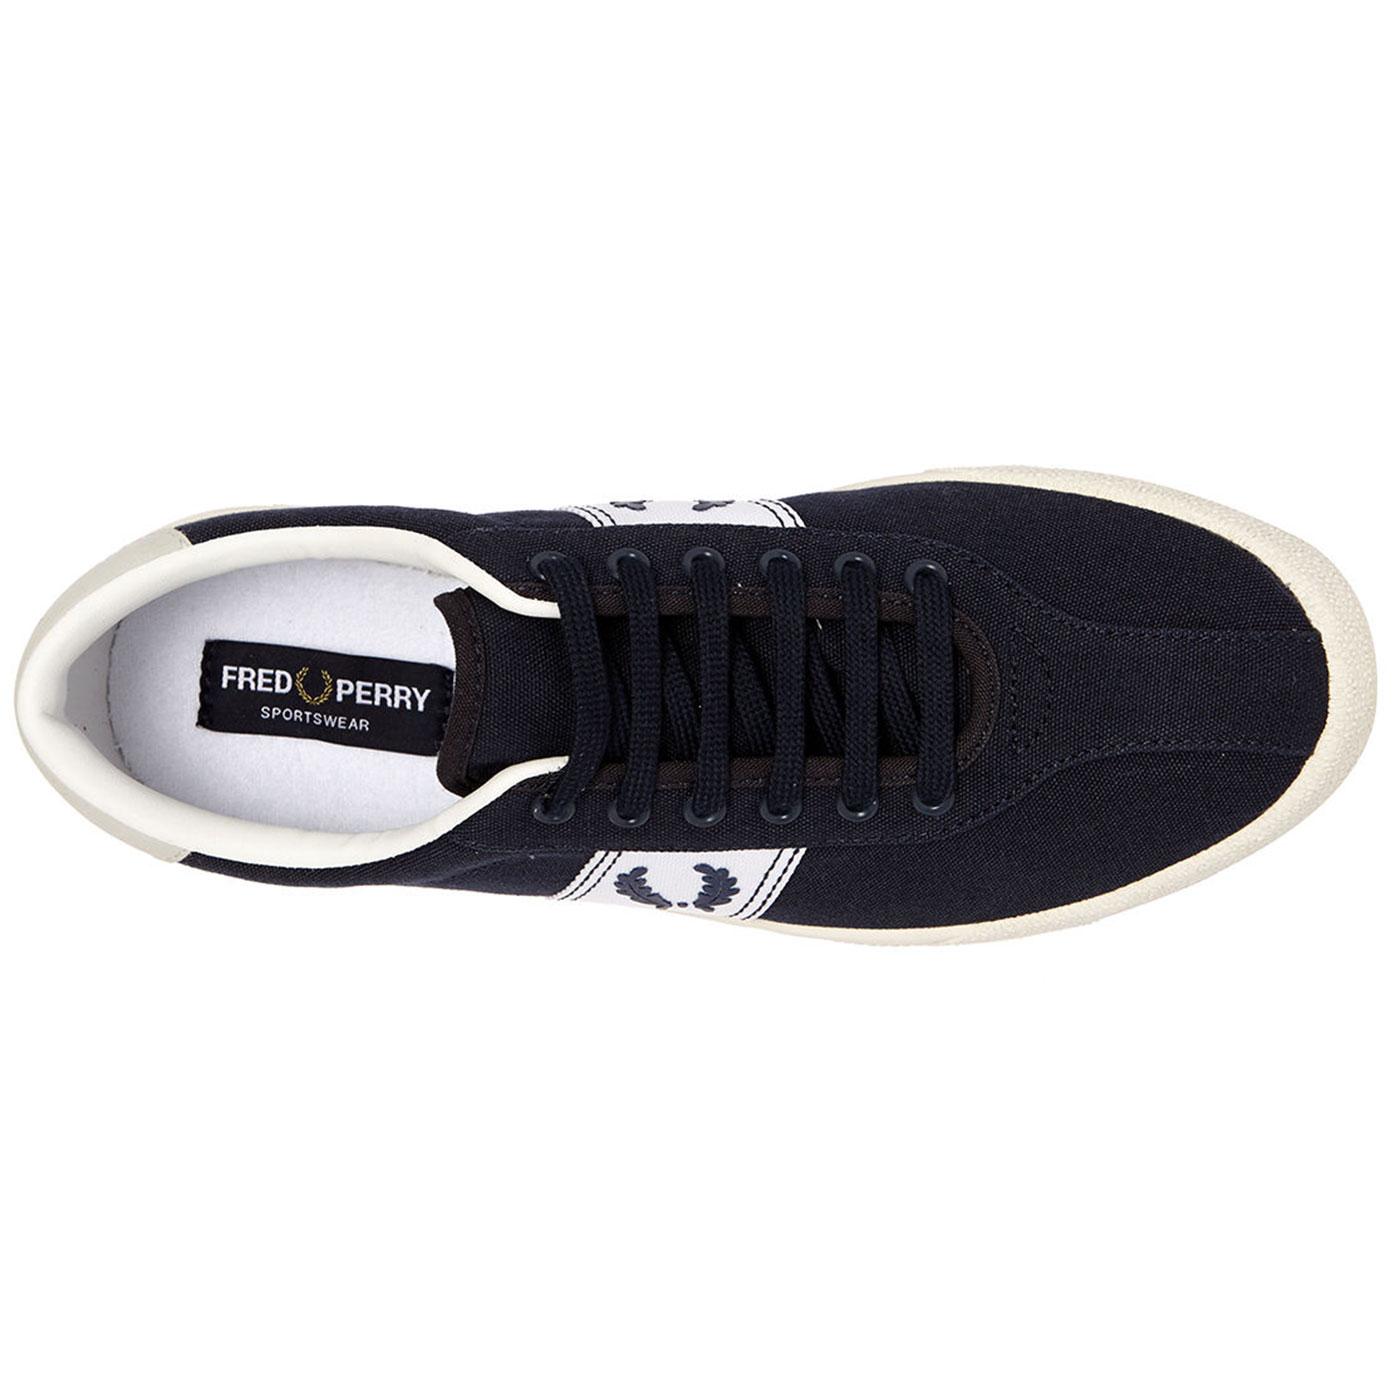 FRED PERRY Mens Retro 70s Tennis Shoes in Navy